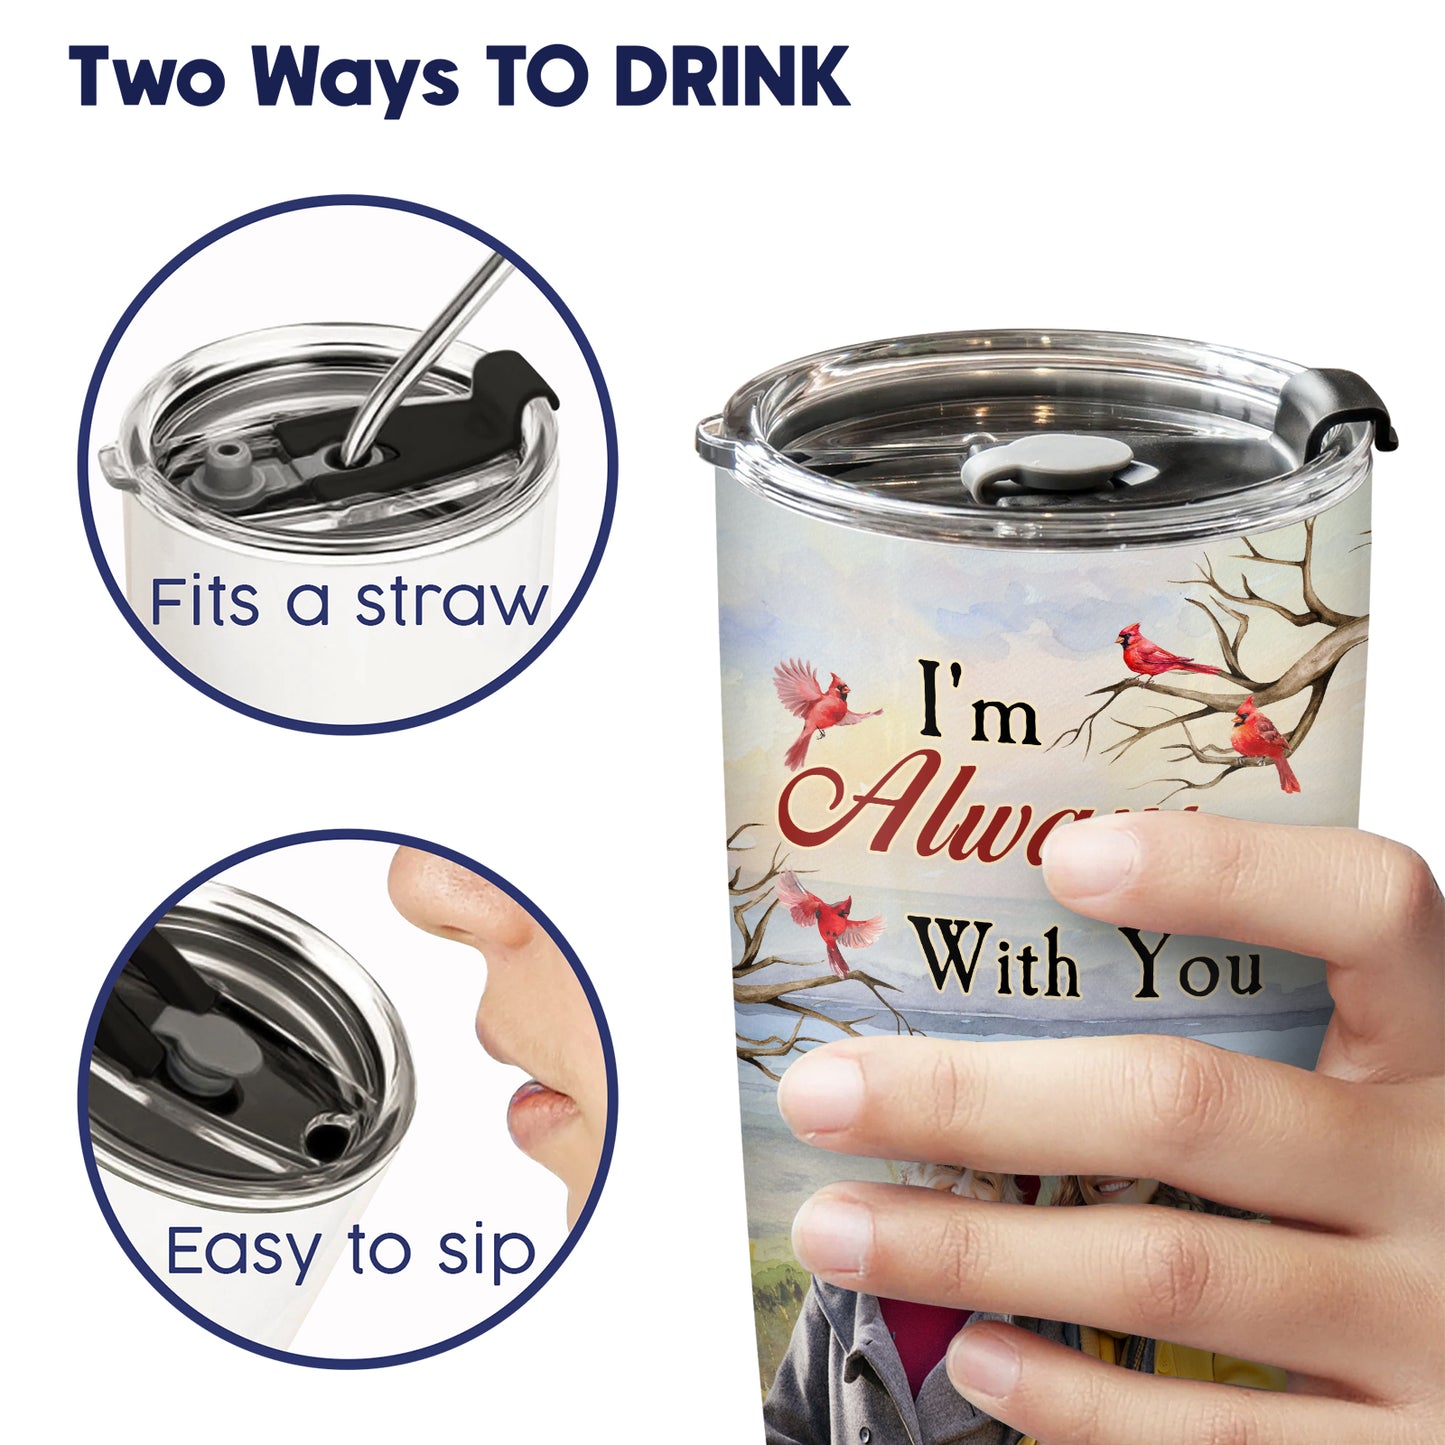 I'm Always With You New Version - Personalized Photo Tumbler Cup